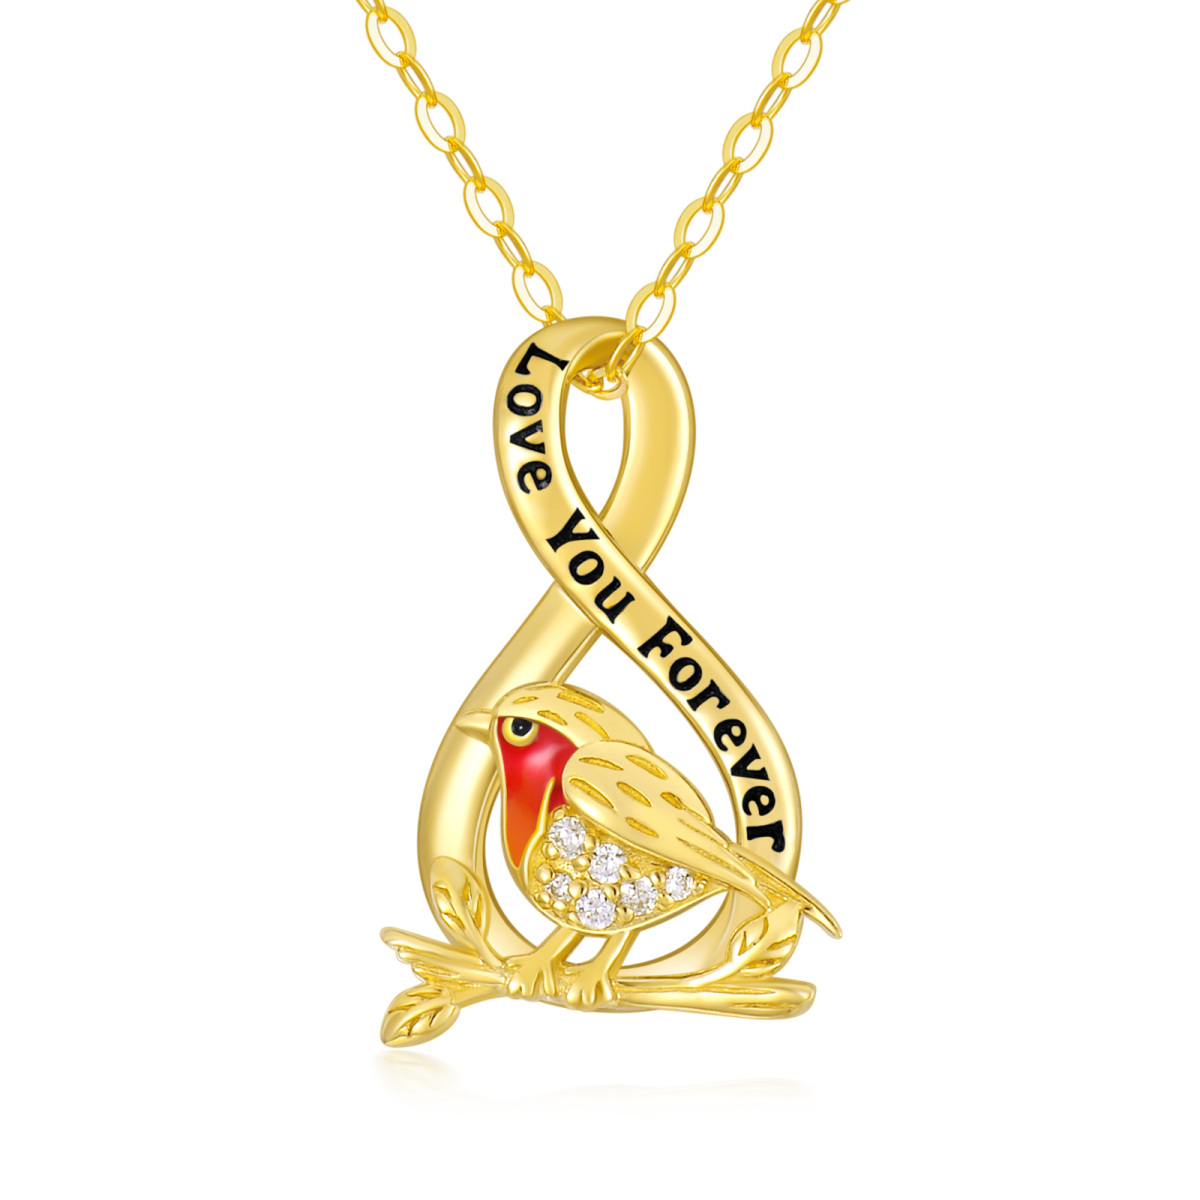 9K Gold Cubic Zirconia Bird & Infinity Symbol Pendant Necklace with Engraved Word-1